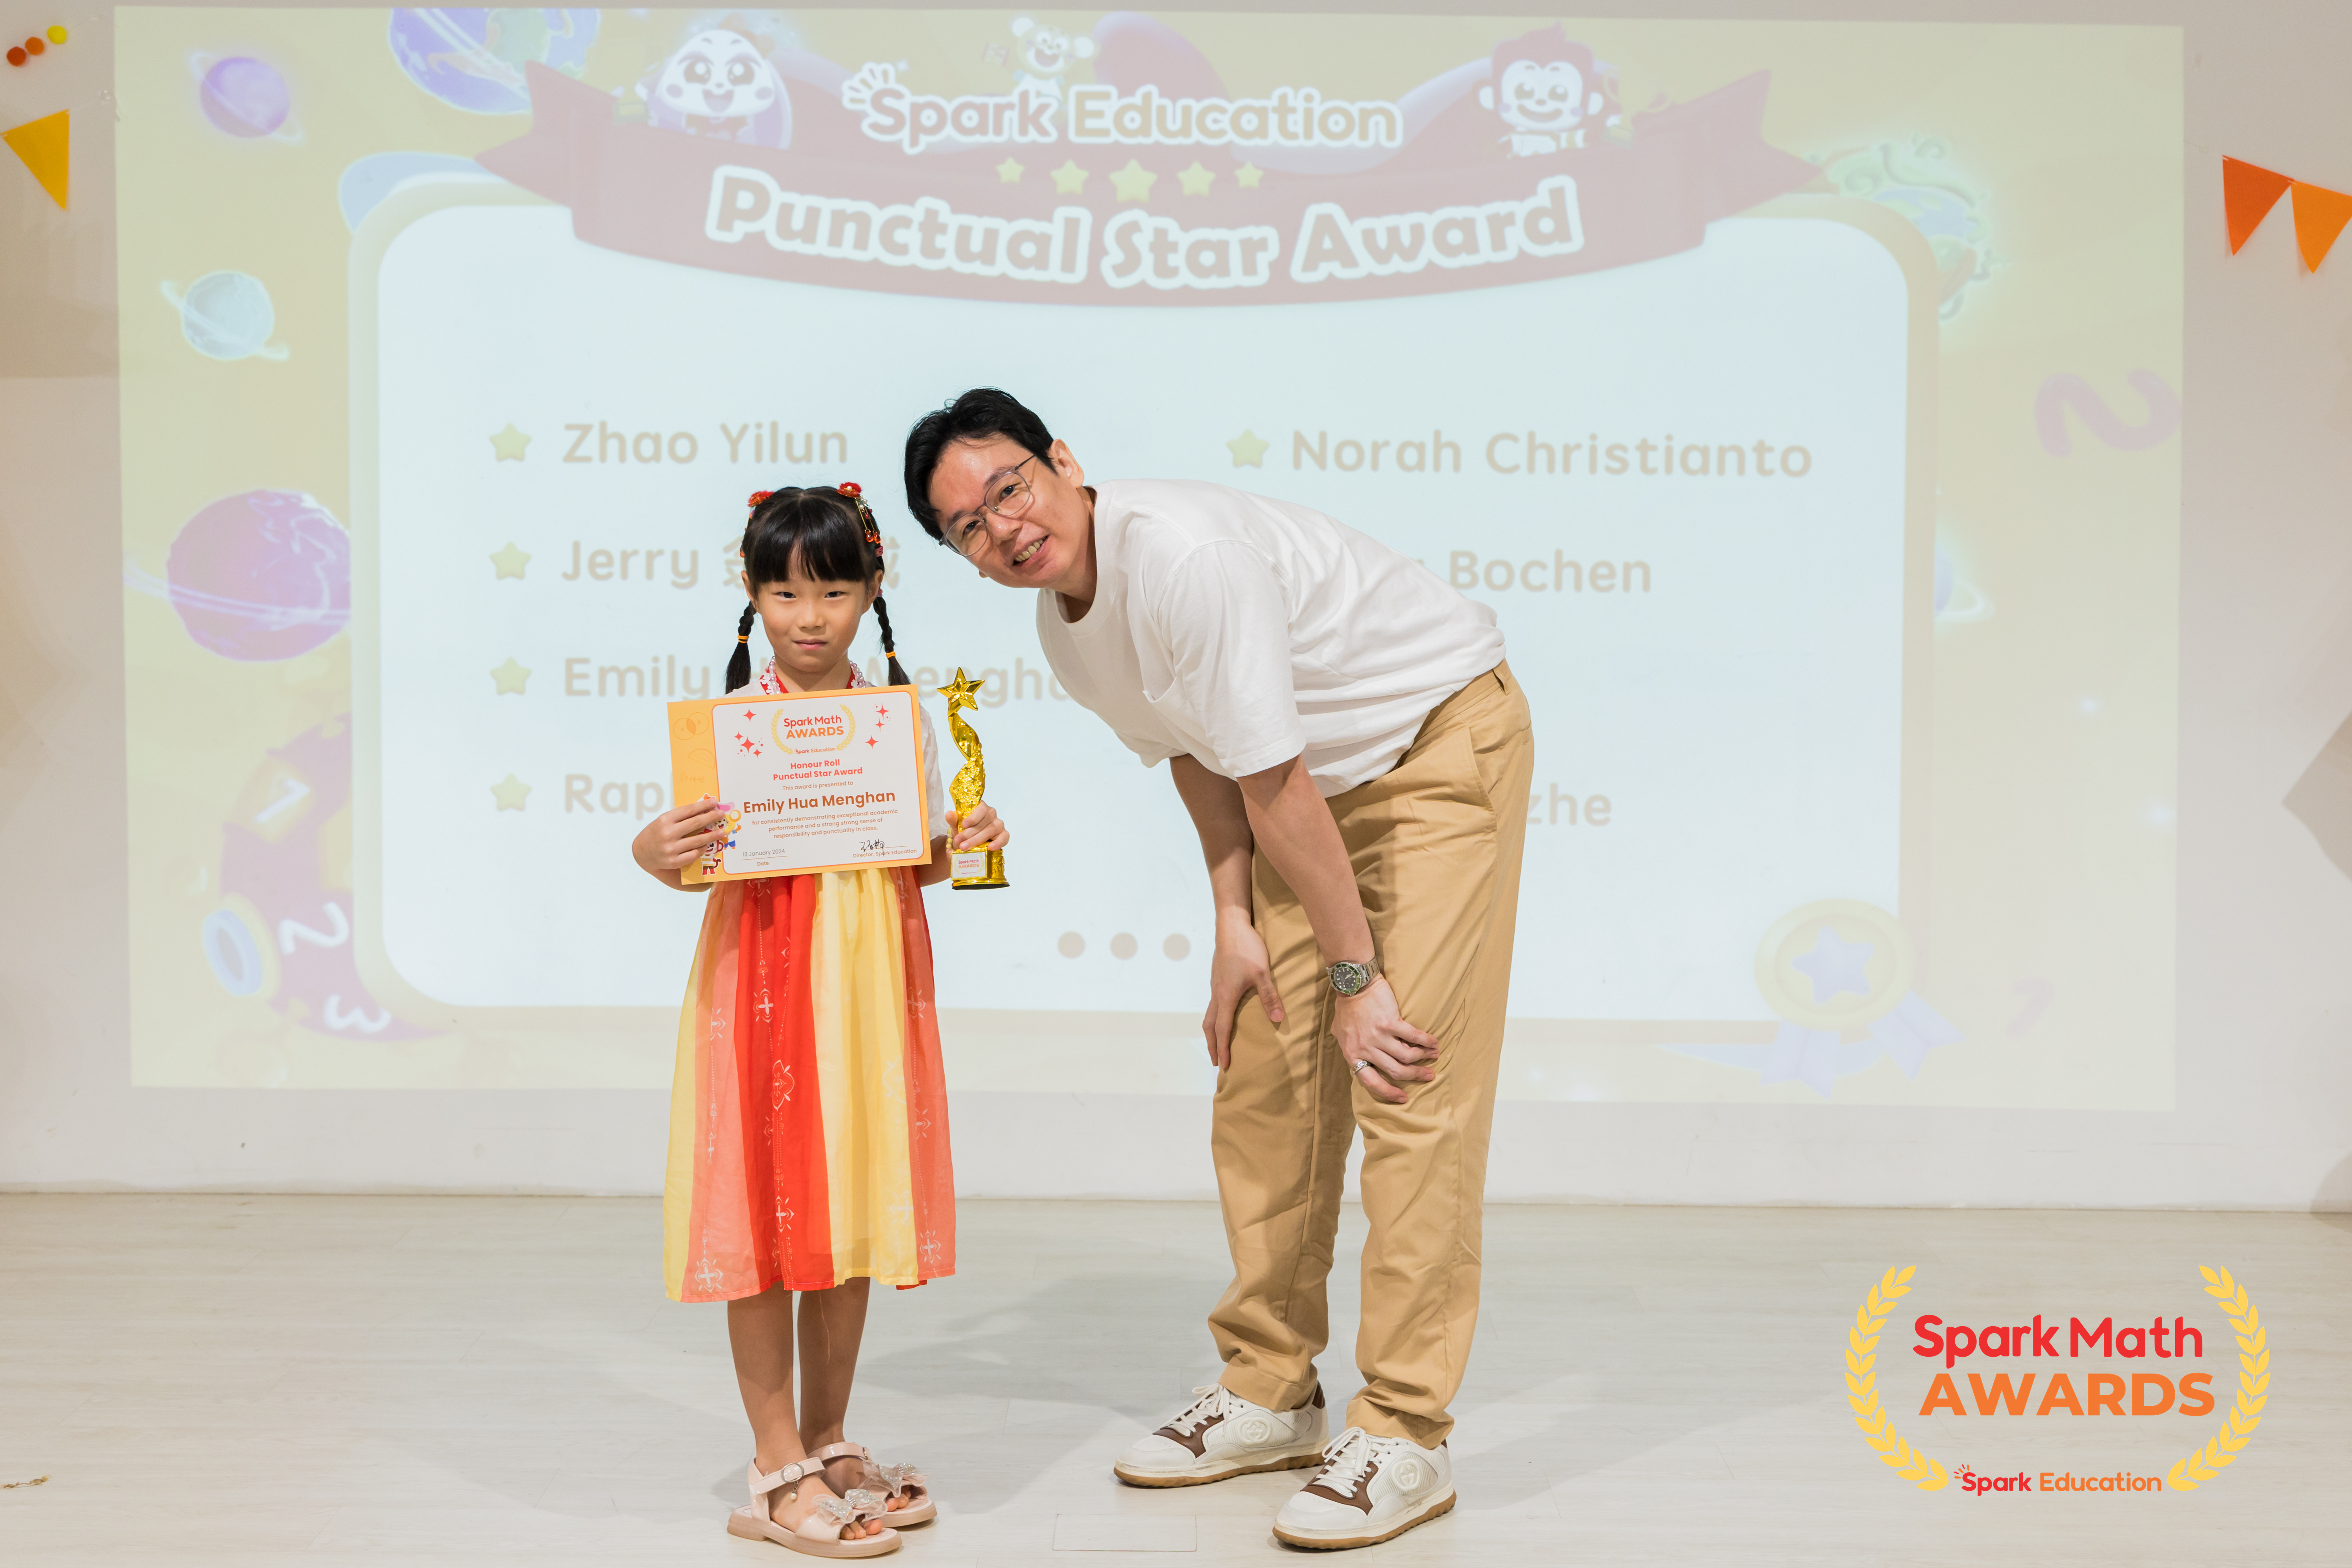 Teacher Roy, Upper Primary Curriculum Specialist, presenting the Honour Roll and Punctual Star awards to top performing Spark Math winners who have shown a great sense of responsibility and punctuality in all their learning activities.